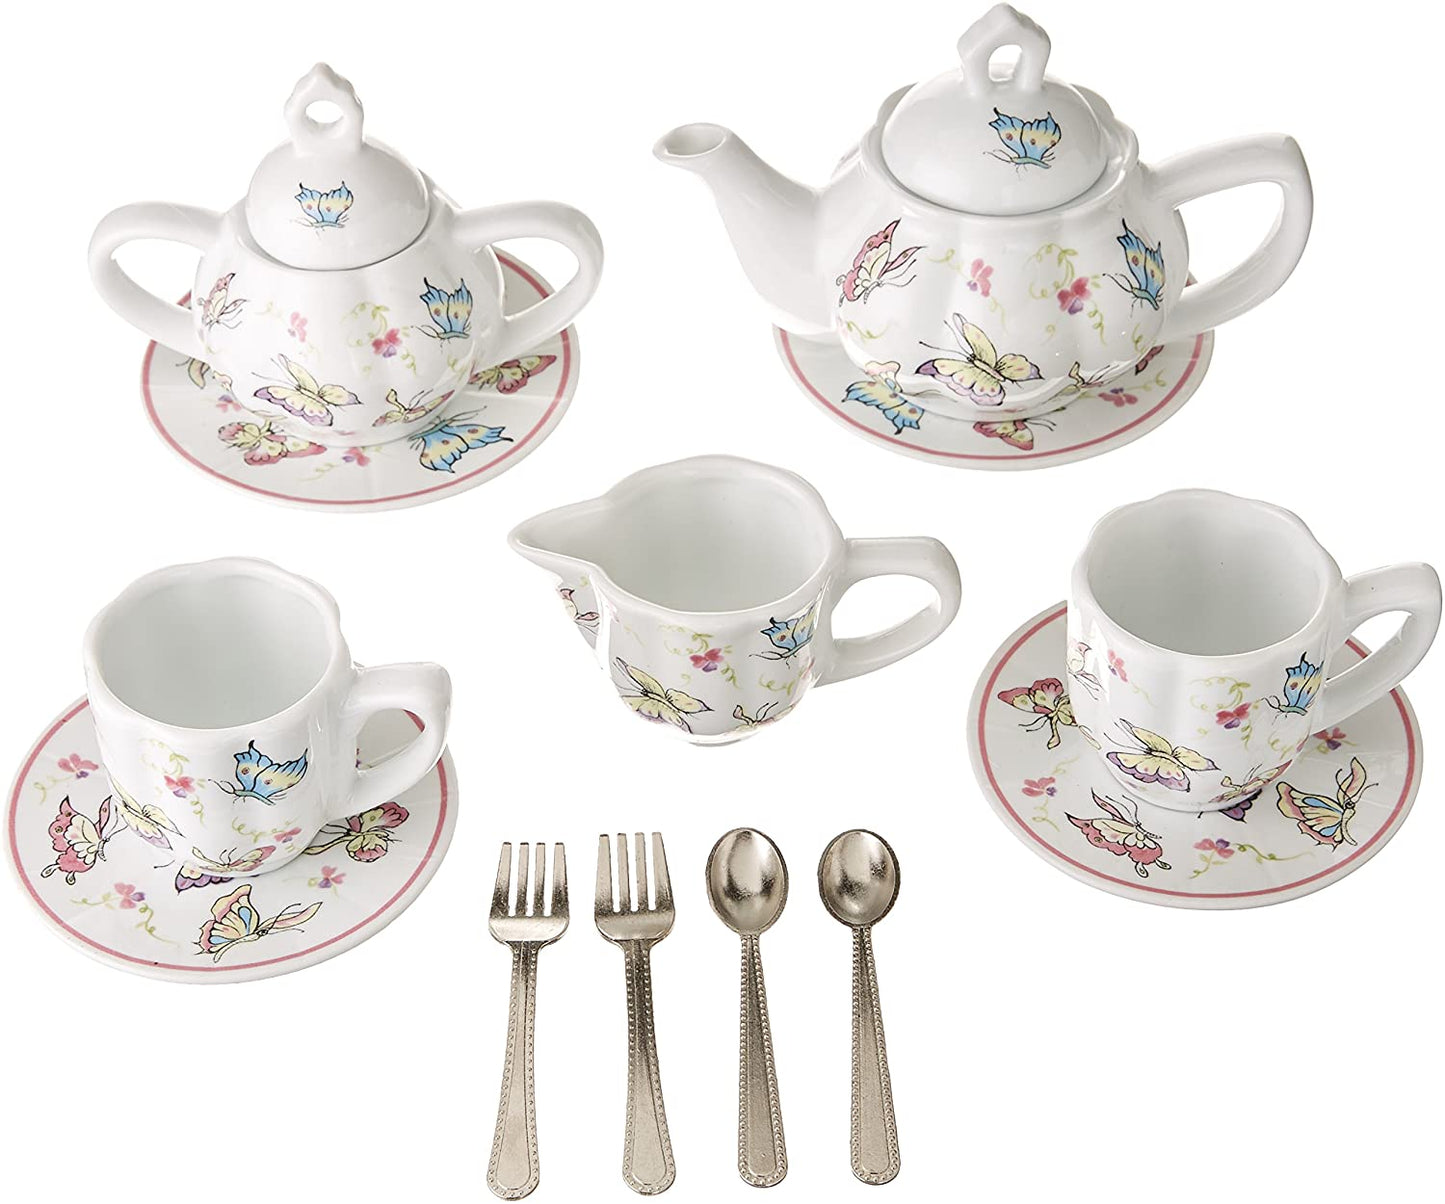 Tea Set for Two Delton Products Butterfly Chintz Children's Tea Set for Two